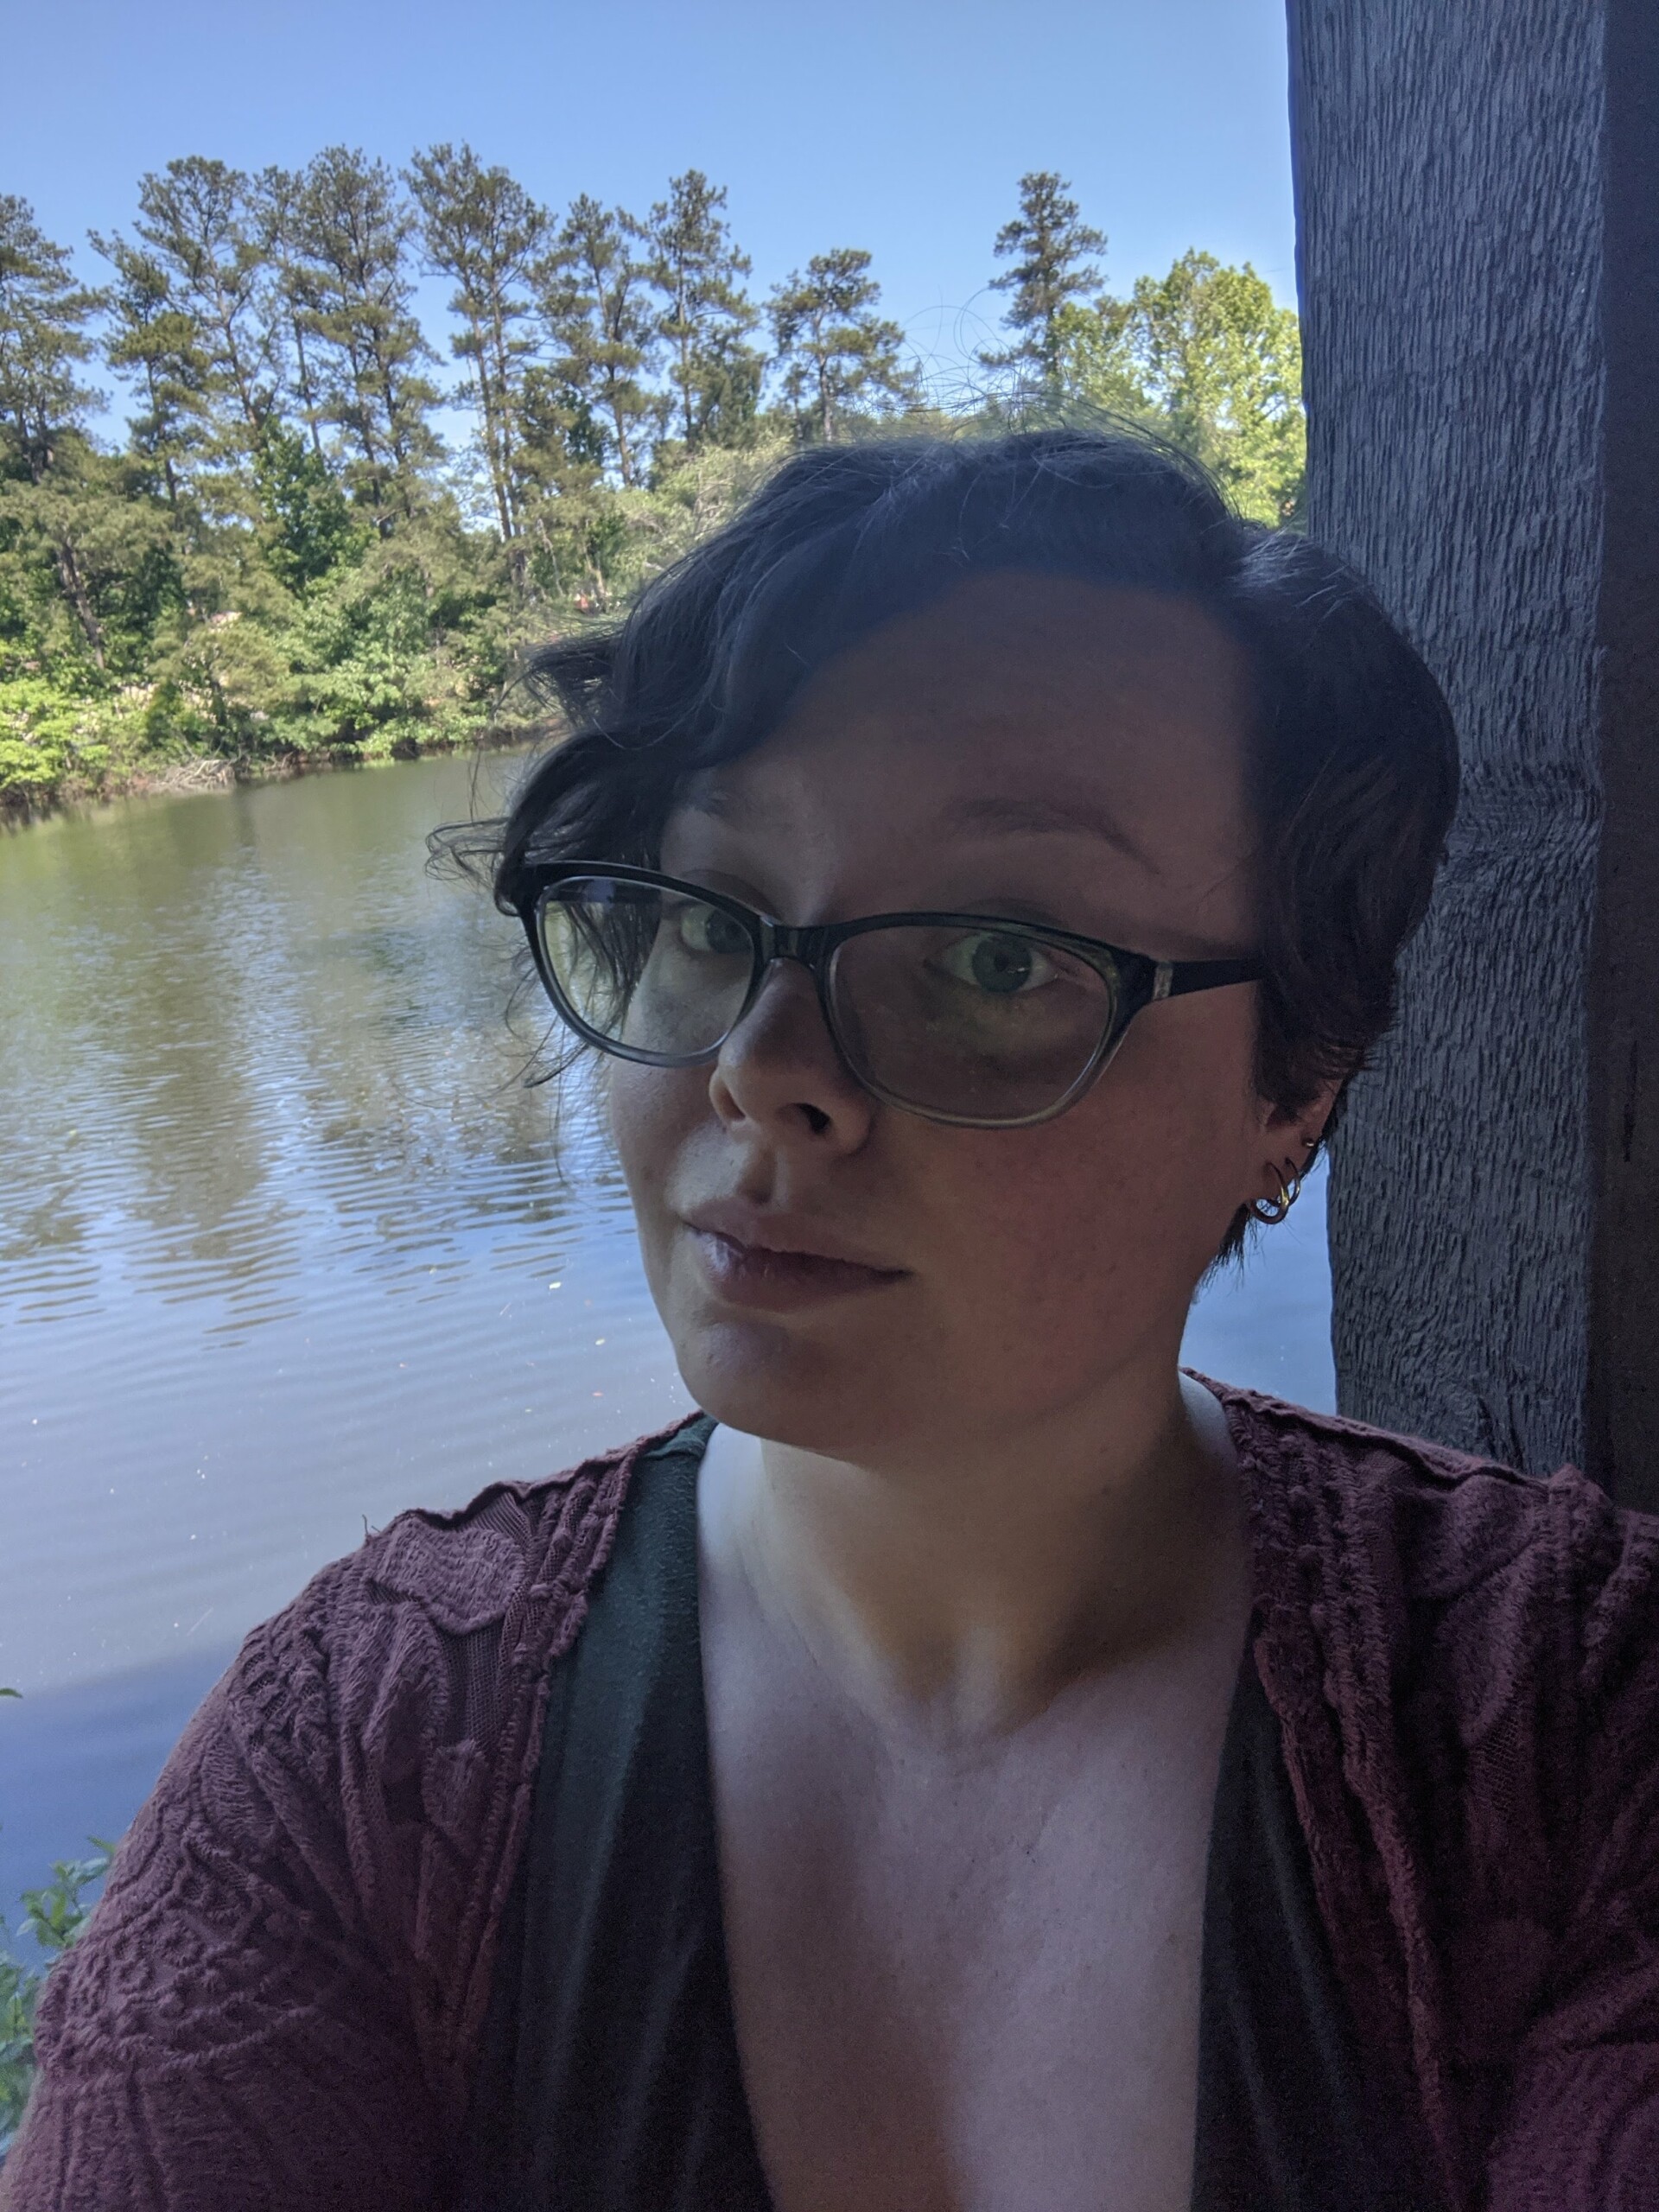 A young person with glasses and short brown hair in front of a lake.